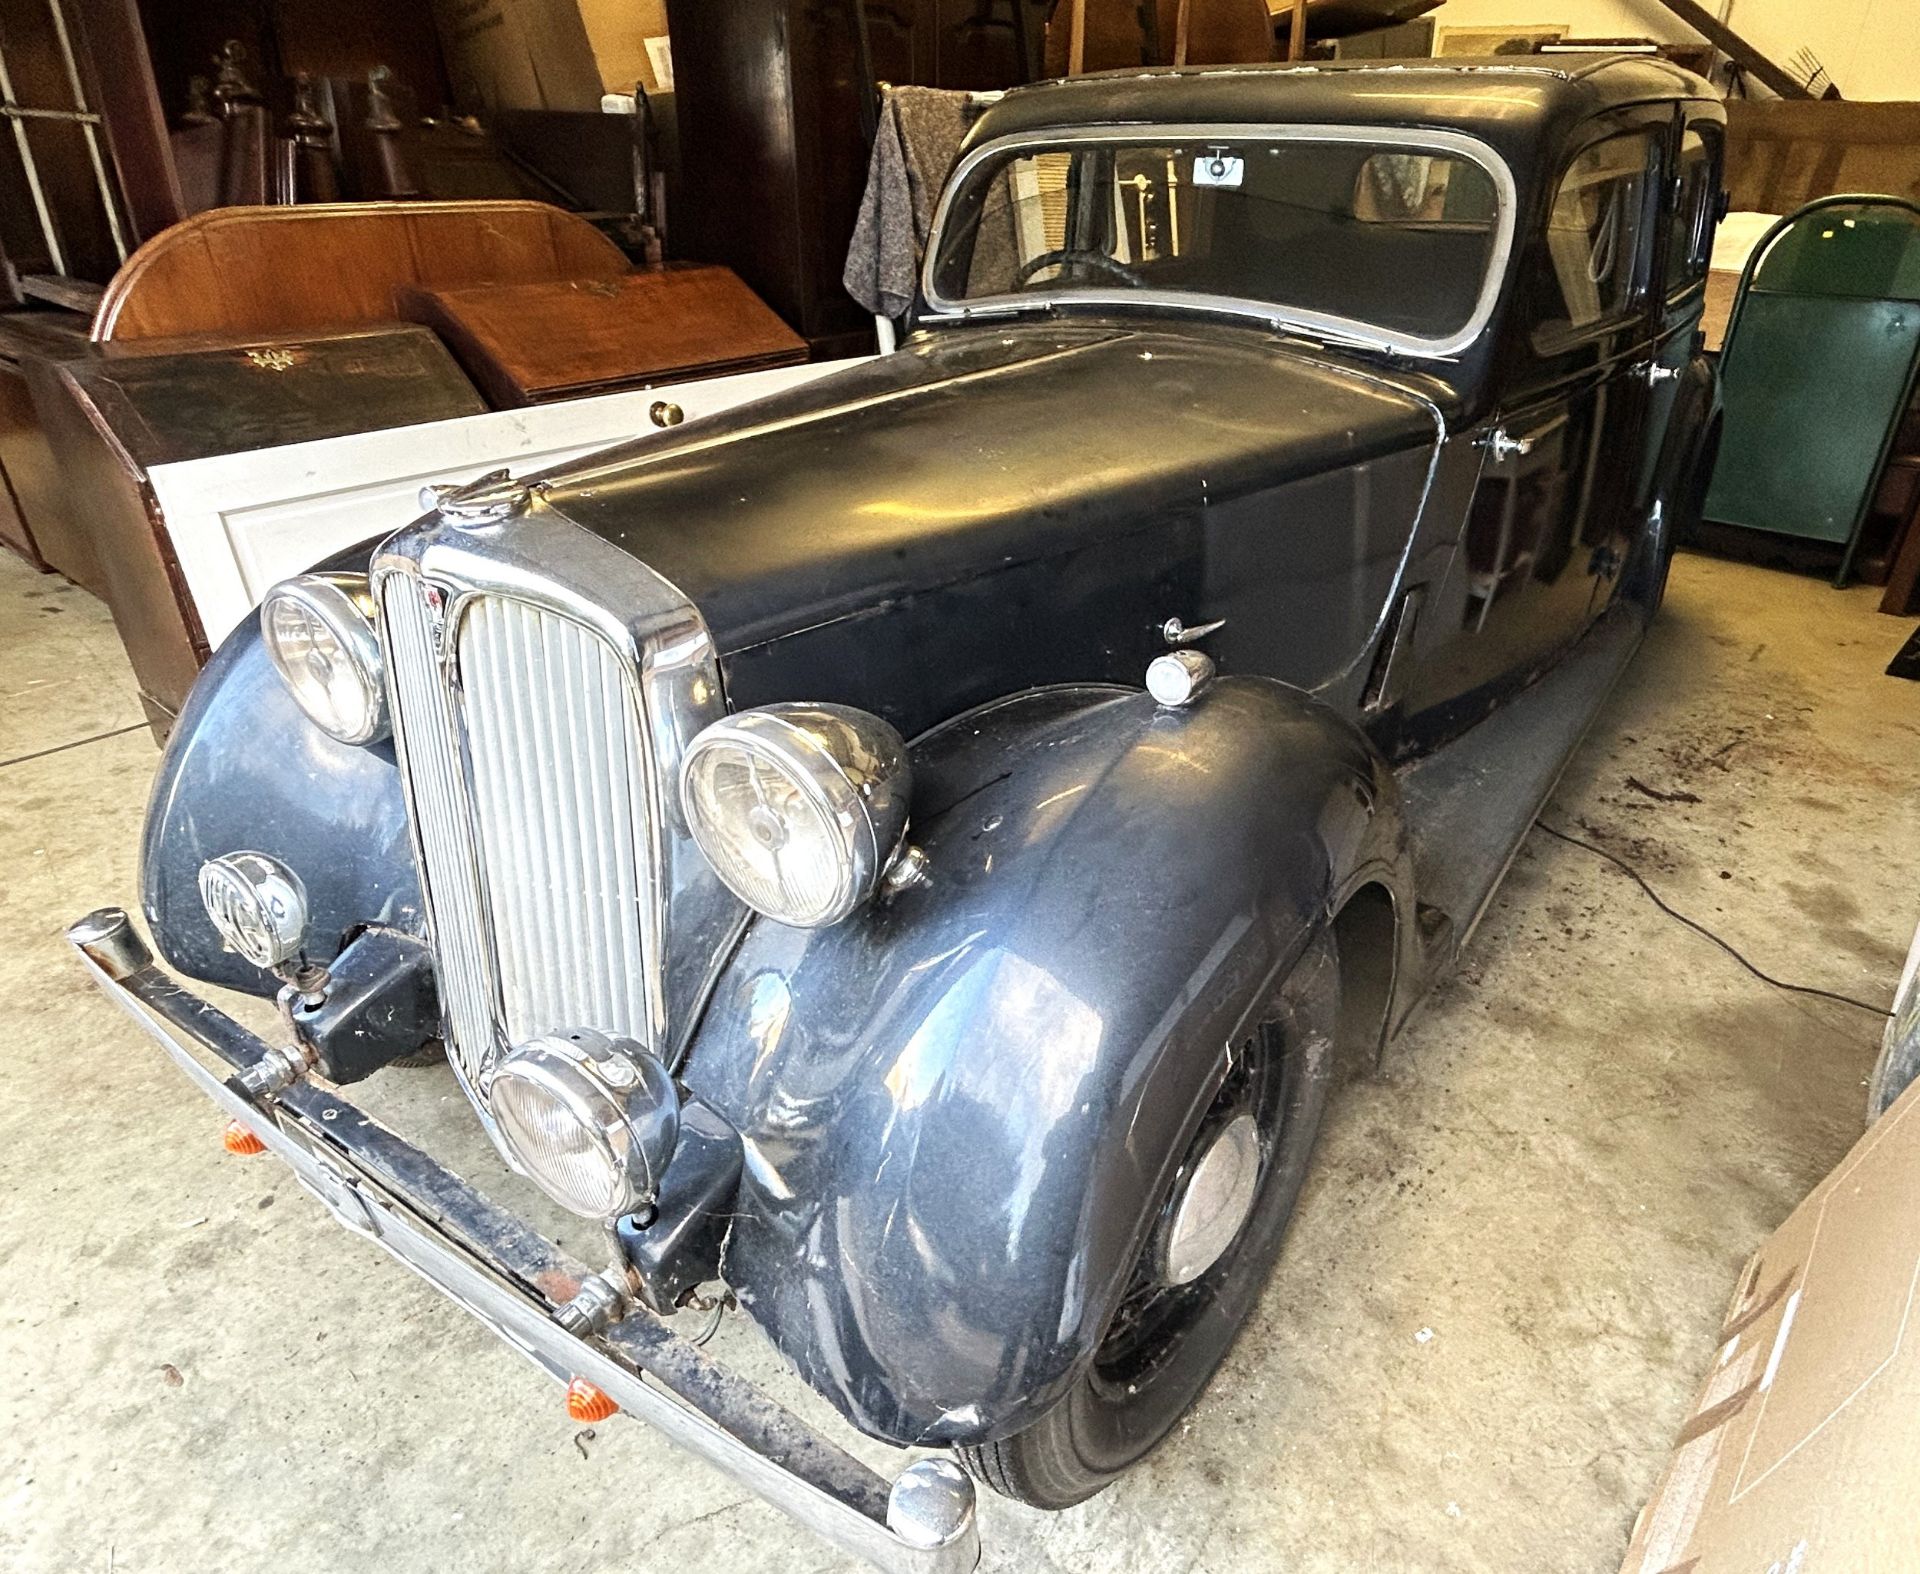 1938 ROVER 12HP SPORTS SALOON Registration Number: ETV 99 Chassis Number: 841520 Recorded Mileage: